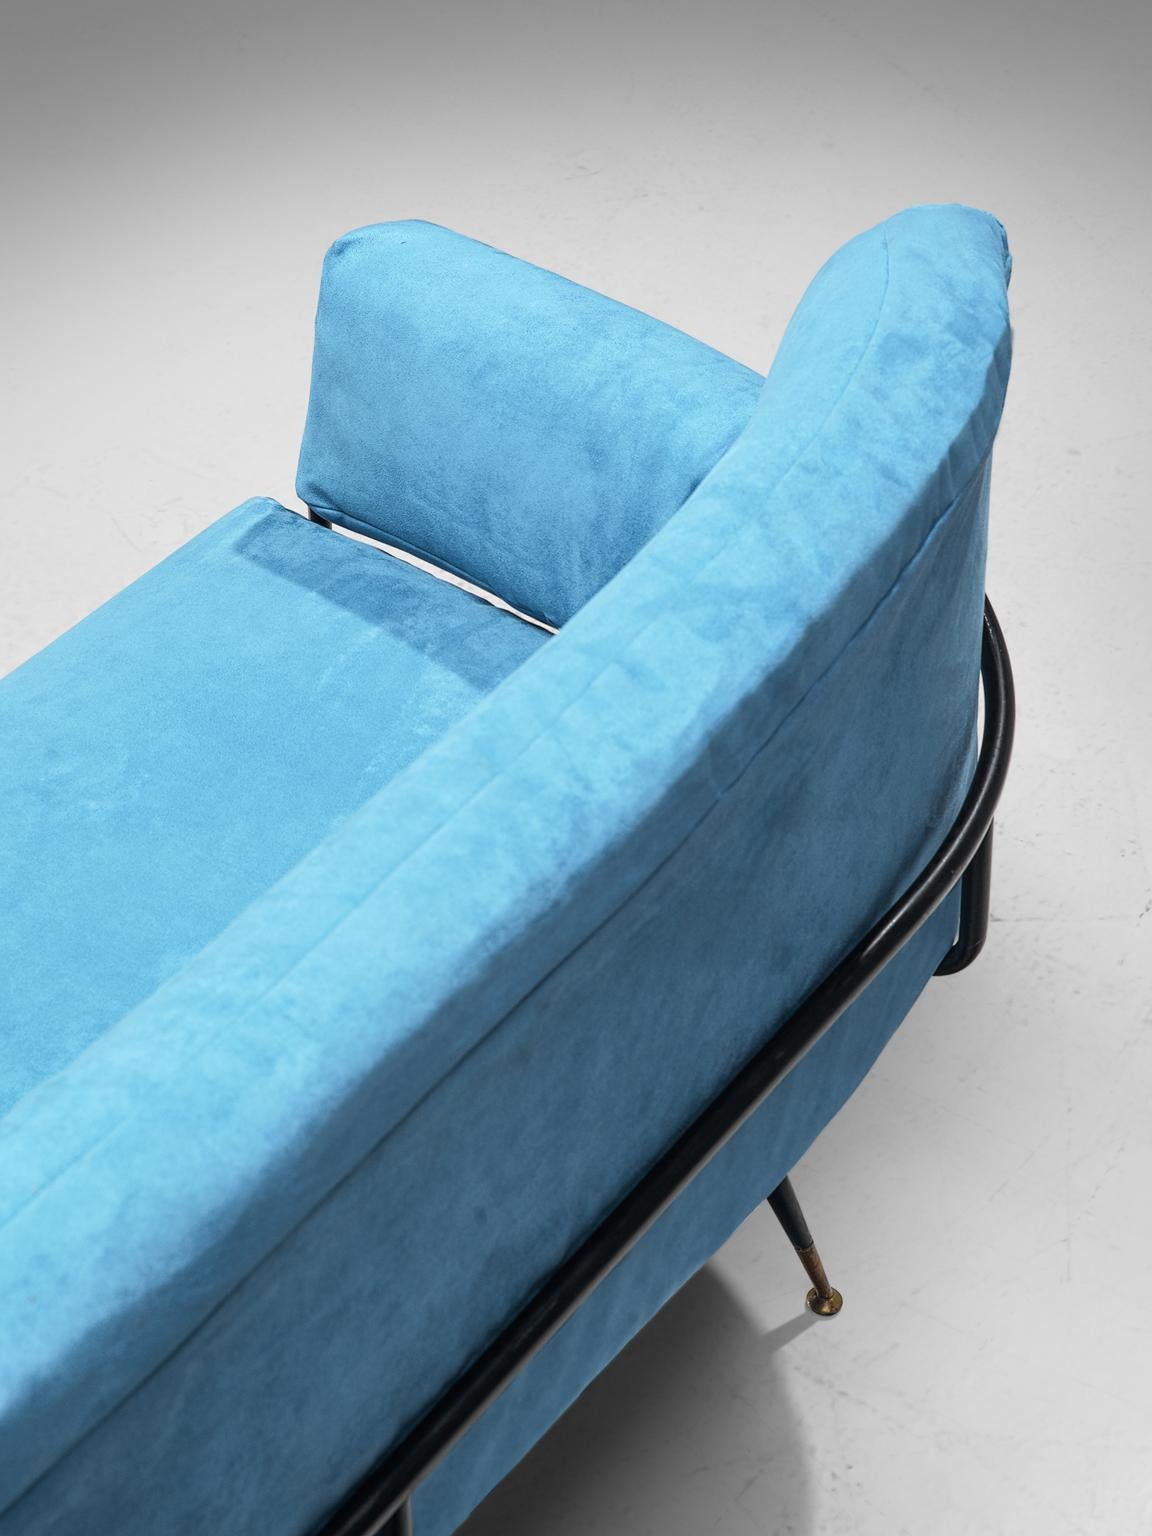 Valla Rito Sofa with Metal Frame in Azure Blue Upholstery 1